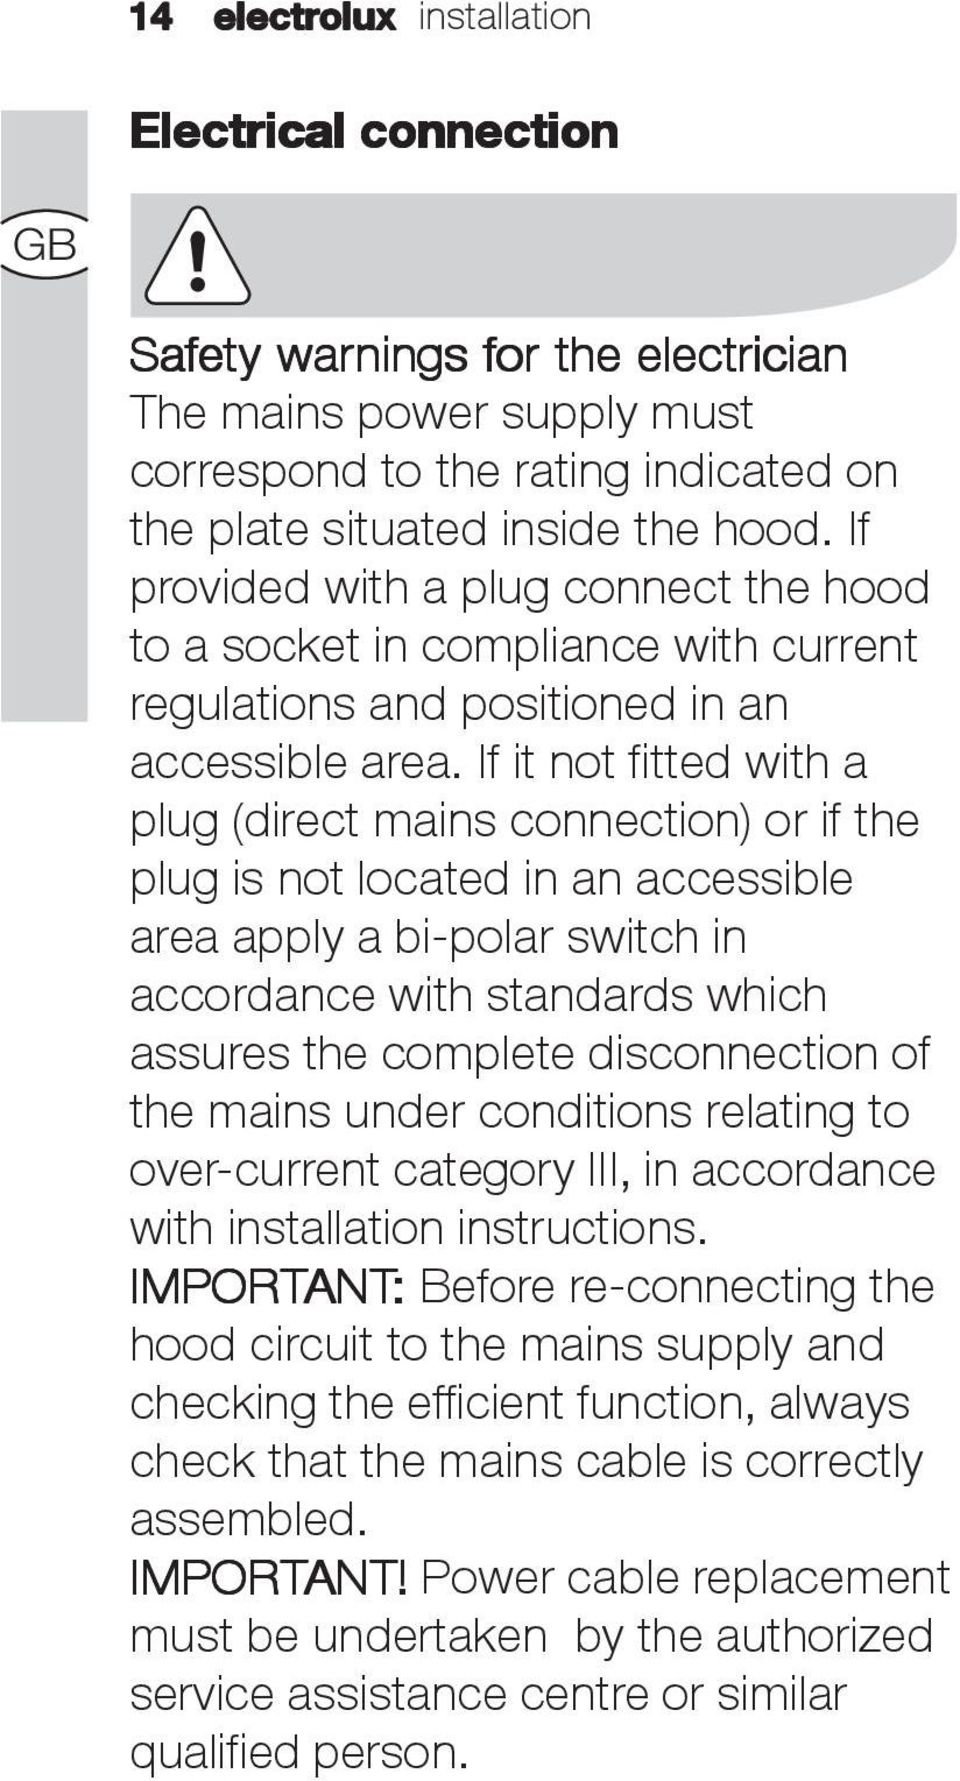 If it not fitted with a plug (direct mains connection) or if the plug is not located in an accessible area apply a bi-polar switch in accordance with standards which assures the complete